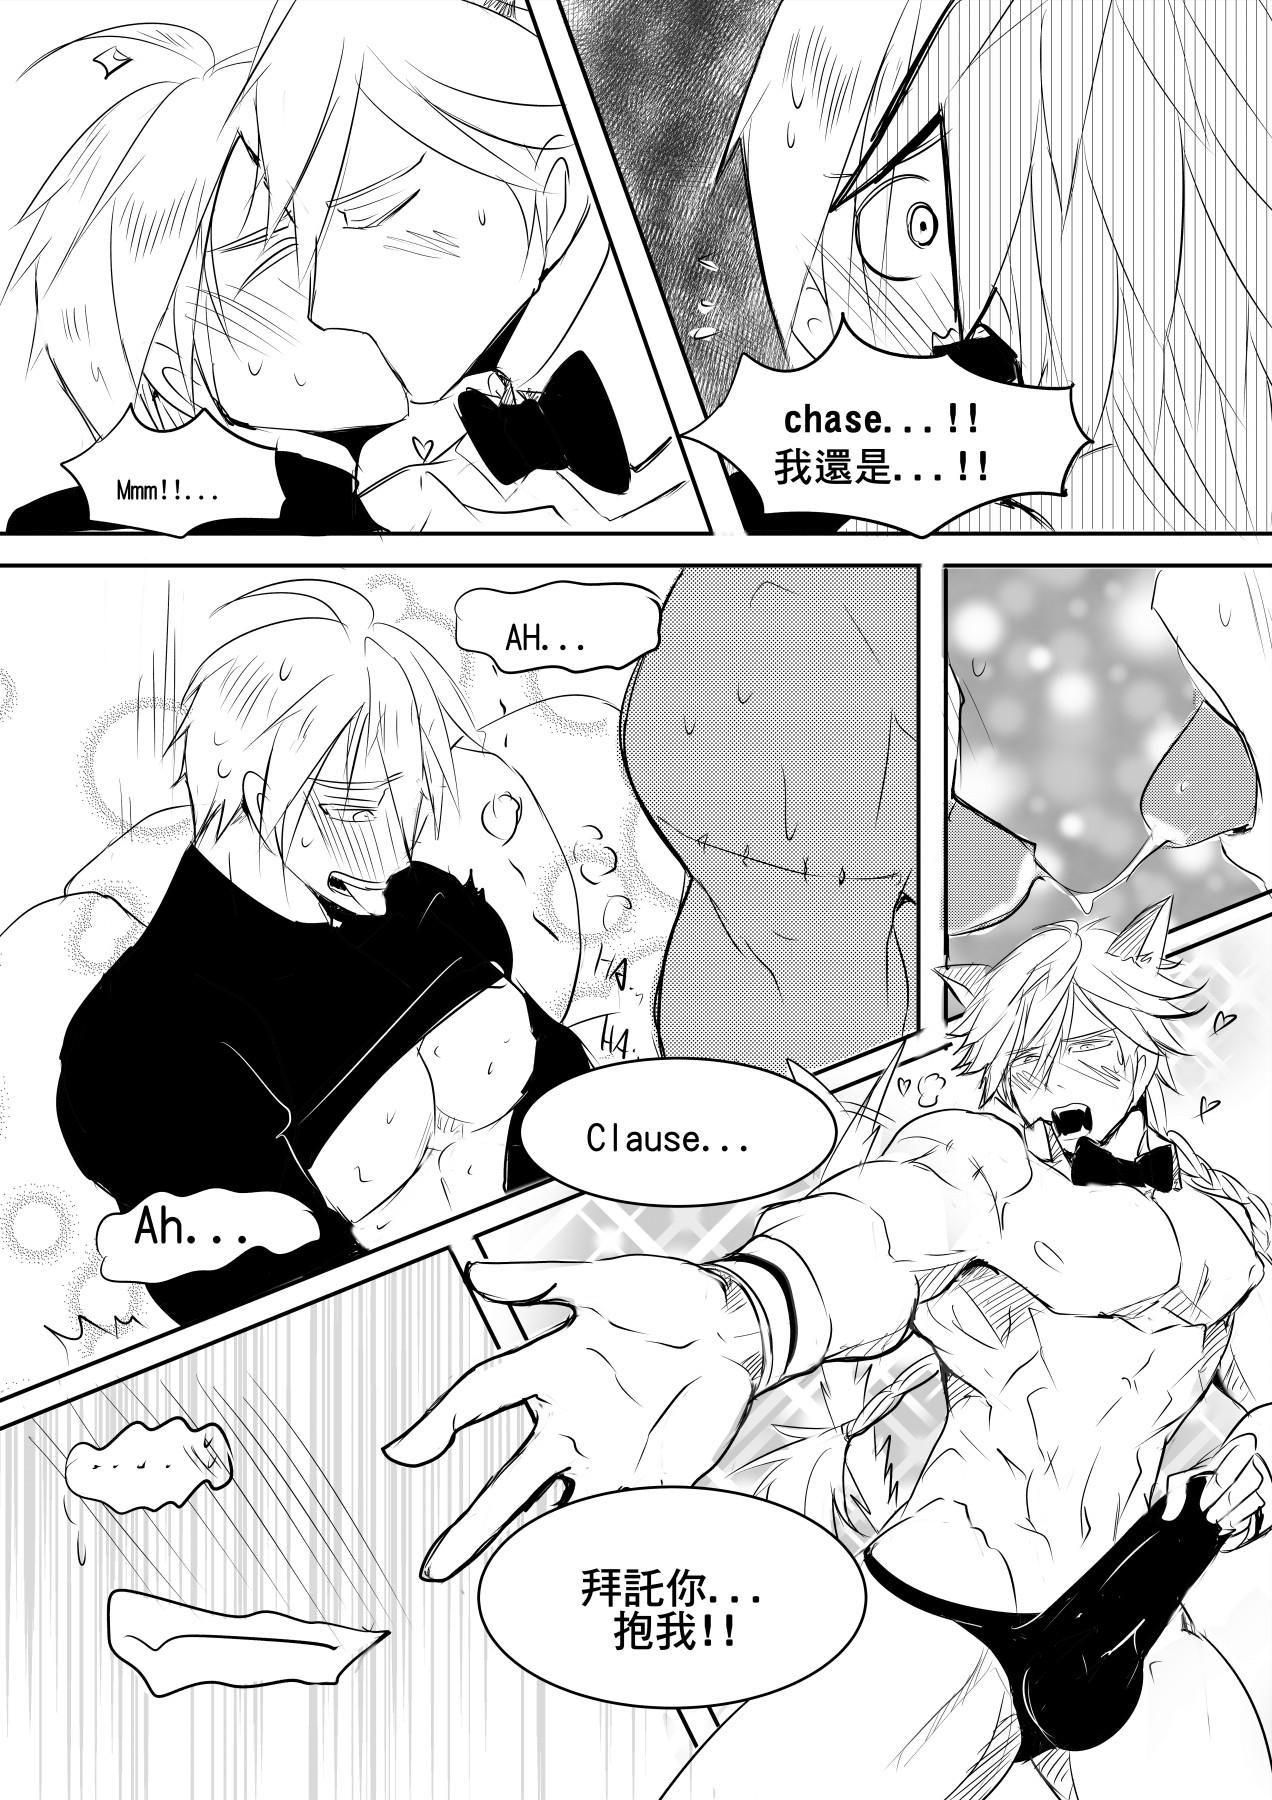 Best Blowjob Ever at your service - Kings raid Wild - Page 9